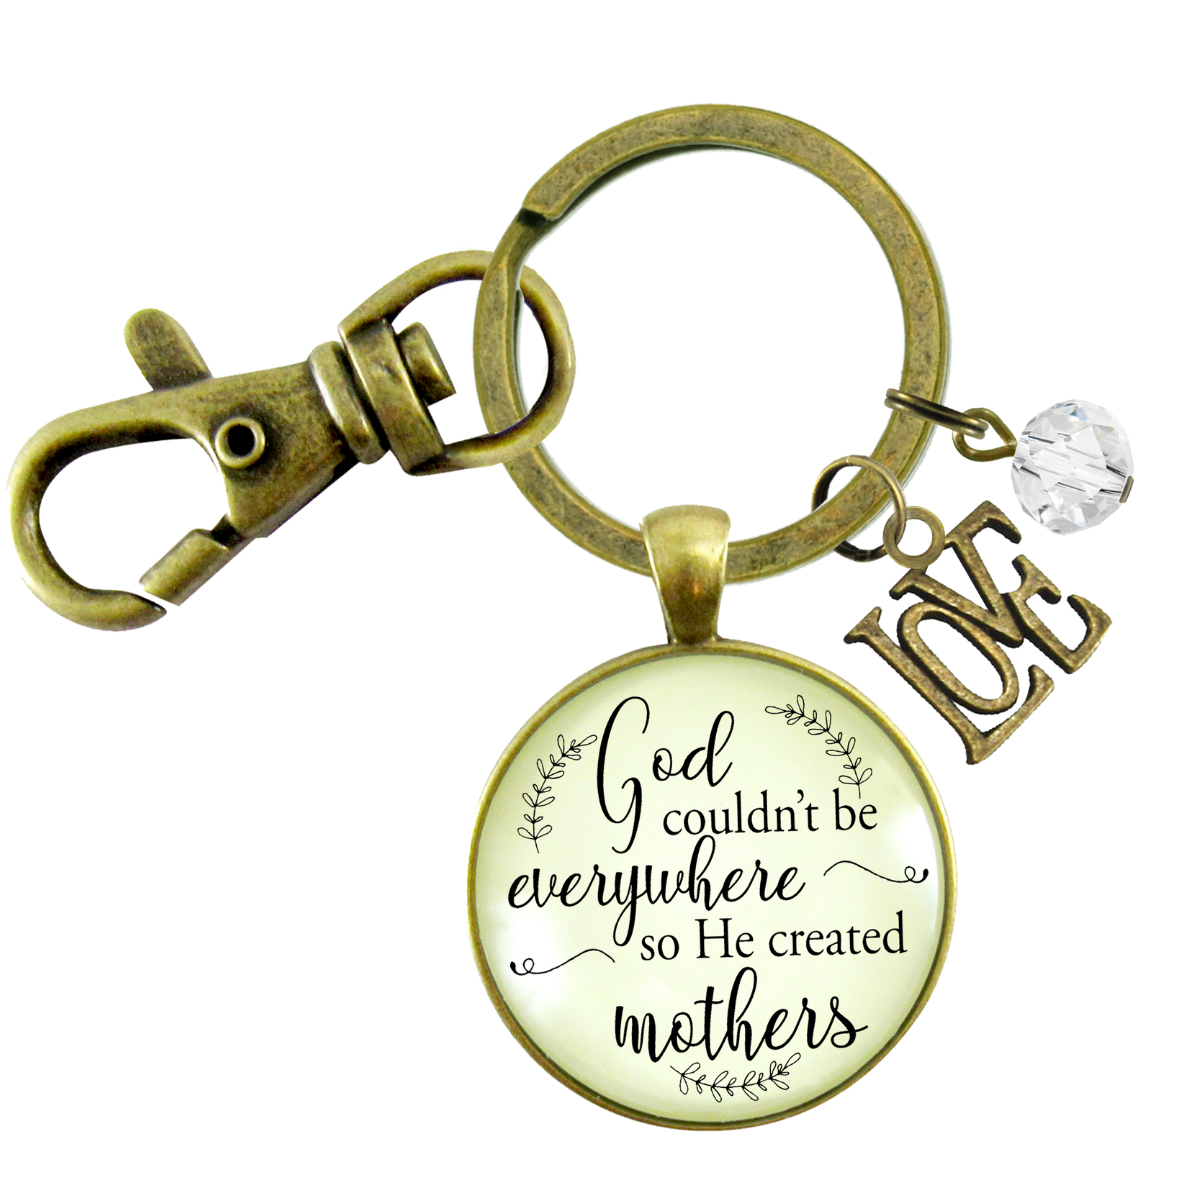 Blessed Mom Keychain Woman of Faith Motherhood Quote Family Love Charm - Gutsy Goodness;Blessed Mom Keychain Woman Of Faith Motherhood Quote Family Love Charm - Gutsy Goodness Handmade Jewelry Gifts